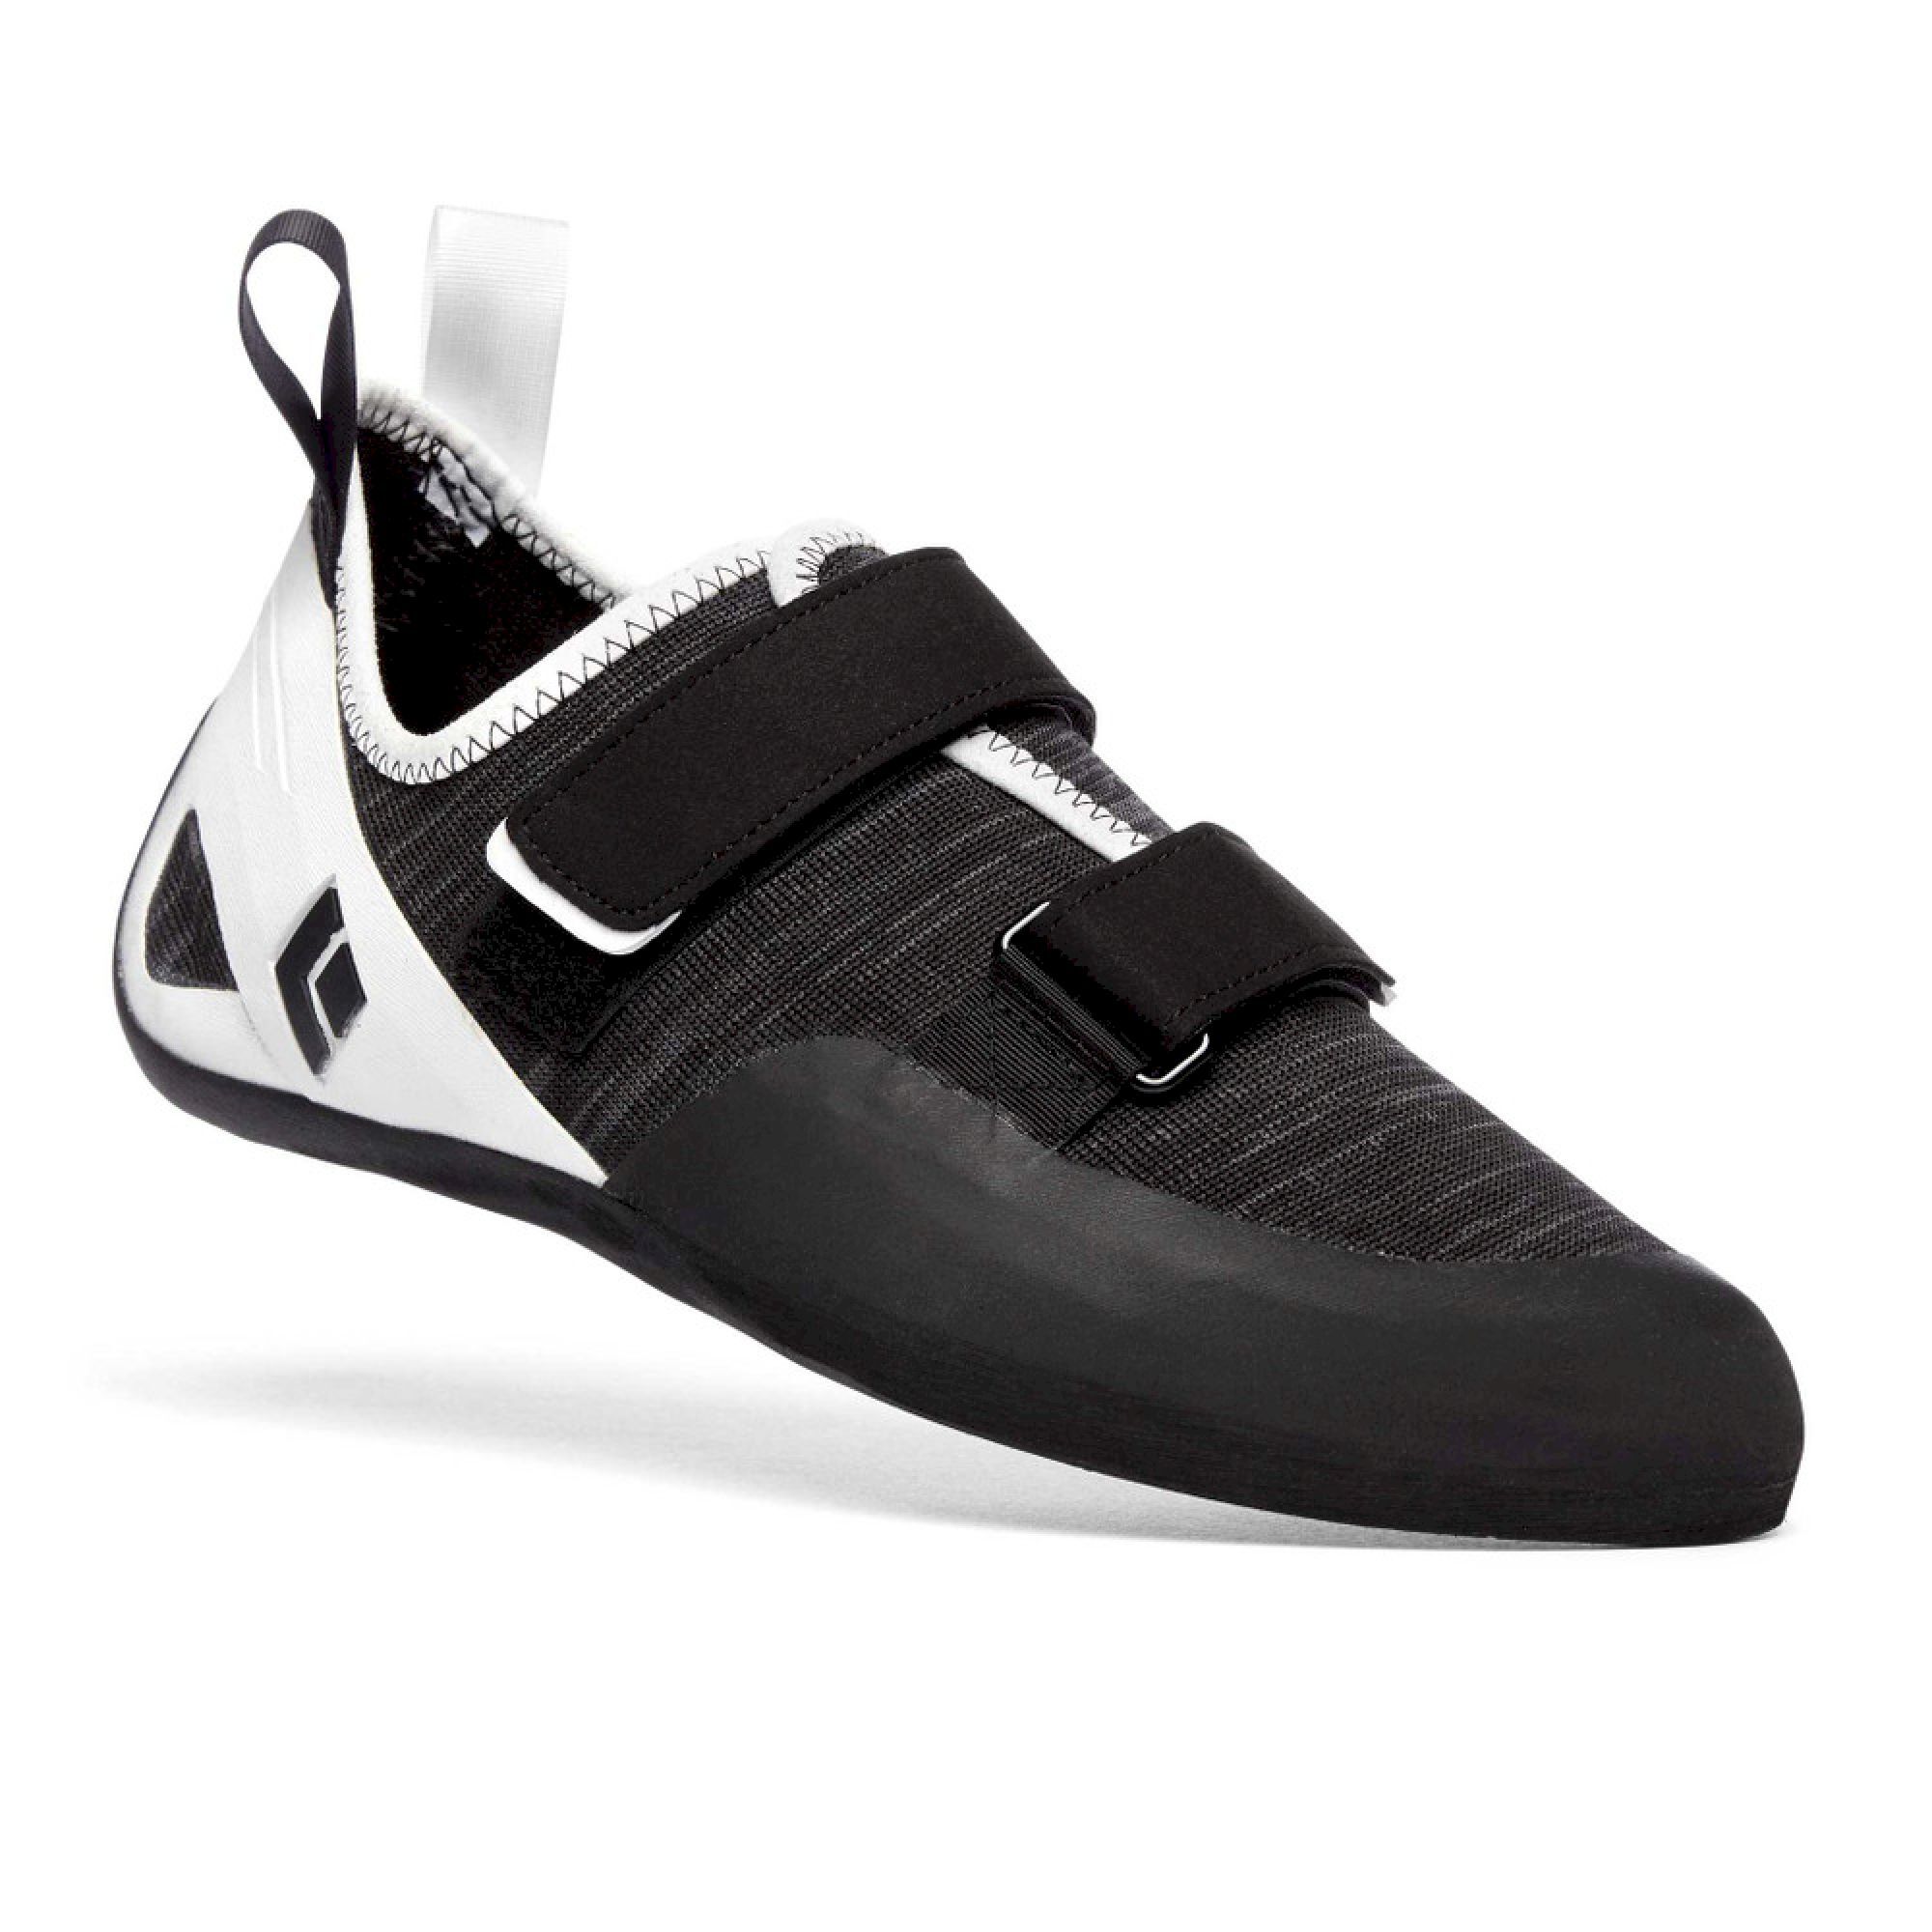 Black Diamond Momentum Climbing Shoes - Chaussons escalade homme | Hardloop